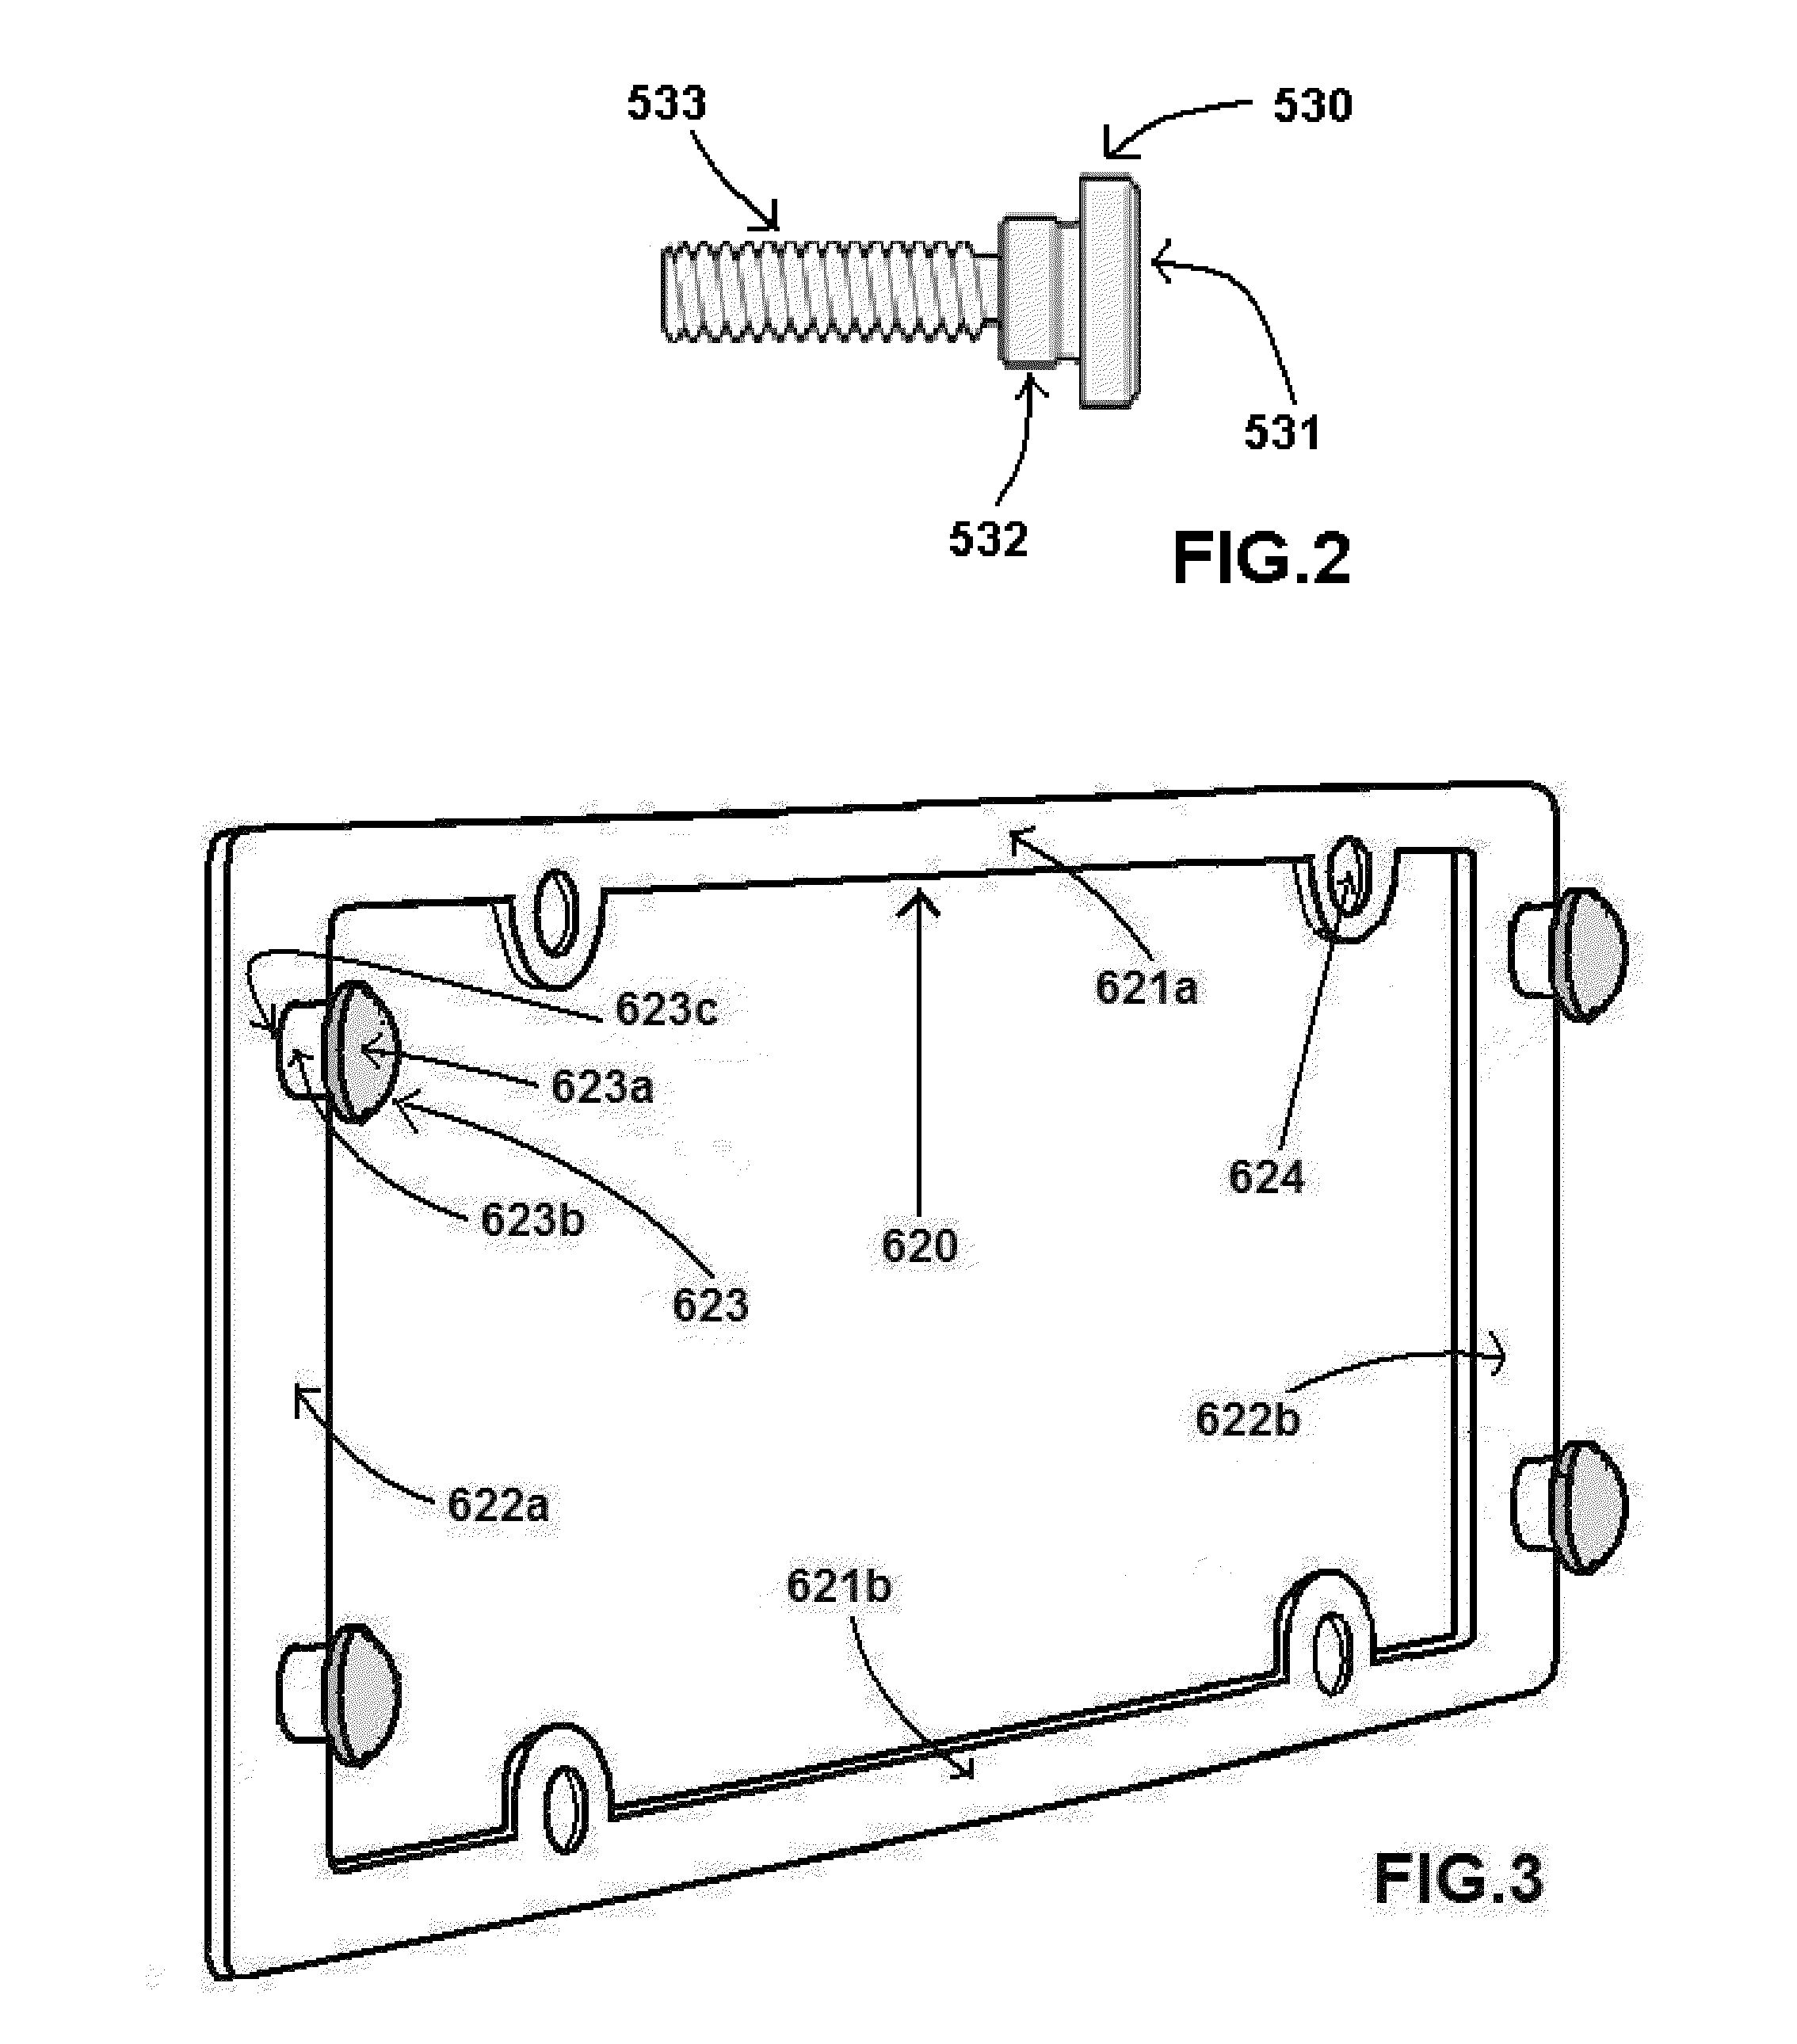 Portable carrier for holding bags or holding displays on vehicles